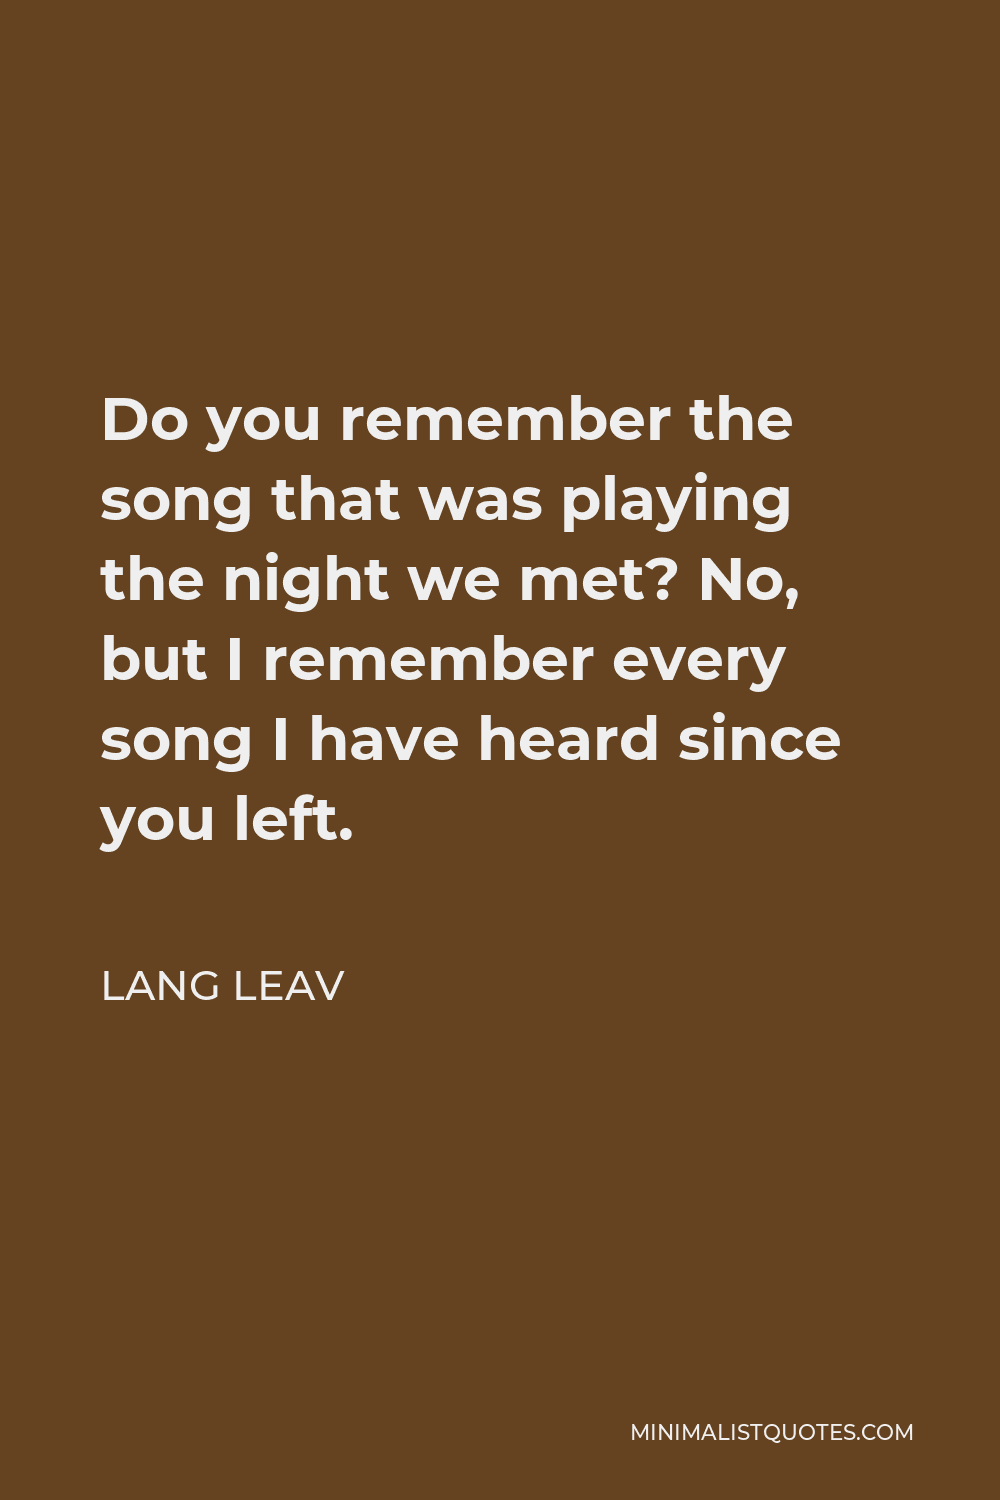 Lang Leav Quote - Do you remember the song that was playing the night we met? No, but I remember every song I have heard since you left.